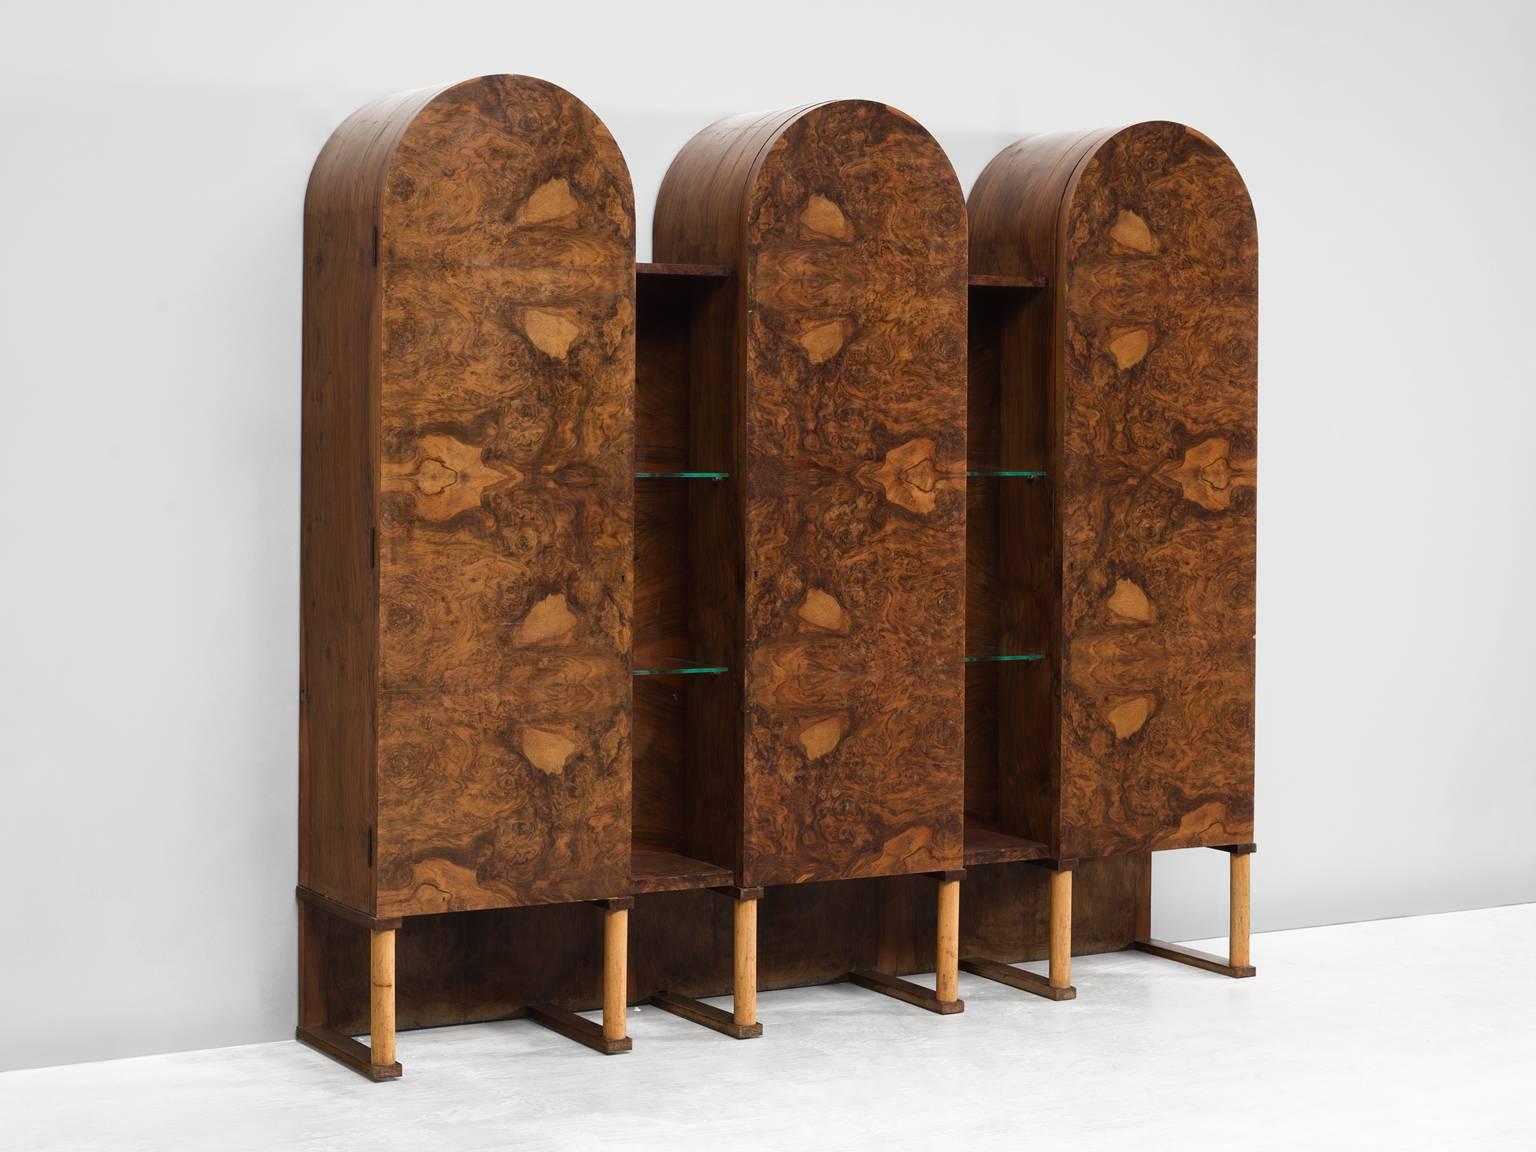 Cabinet, walnut burl, wood, glass, Italy, 1960s.

This sensuous cabinet is executed in walnut burl. The cabinet features three arches with three burl doors, and four shelves. In between the arches are open gaps with featuring two glass shelves.